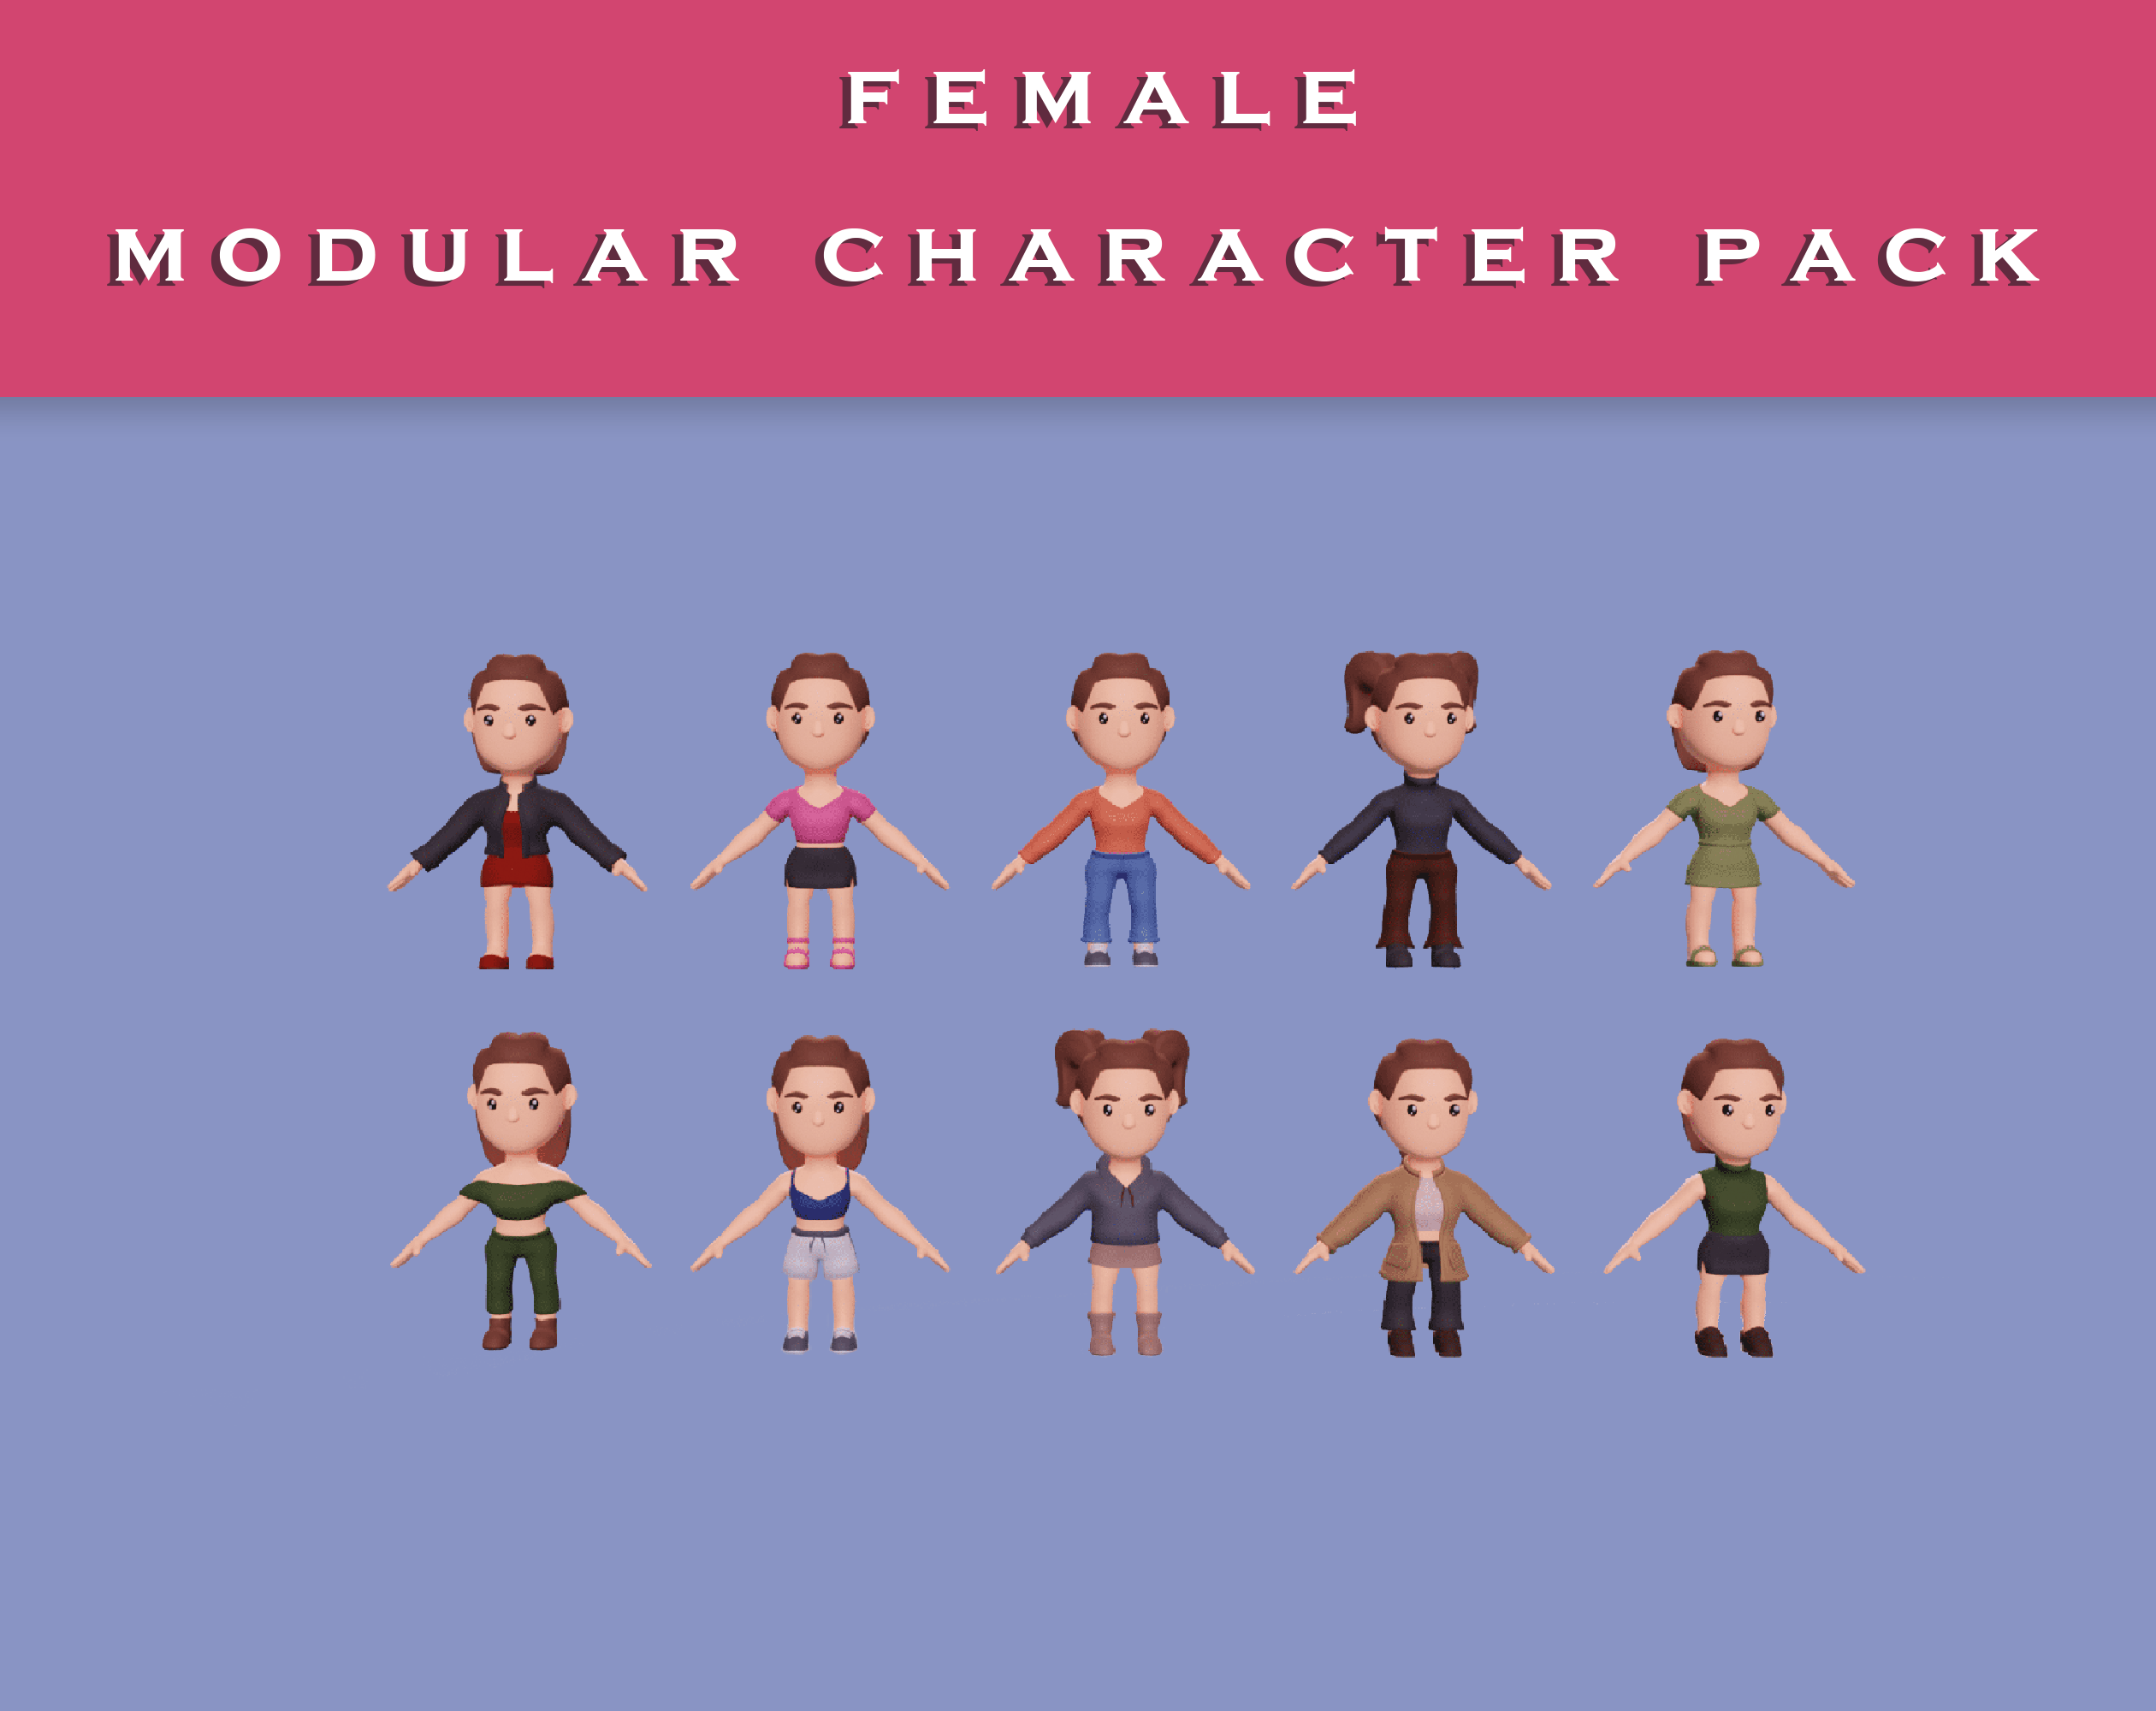 Low Poly Modular Character Assets - Female Pack